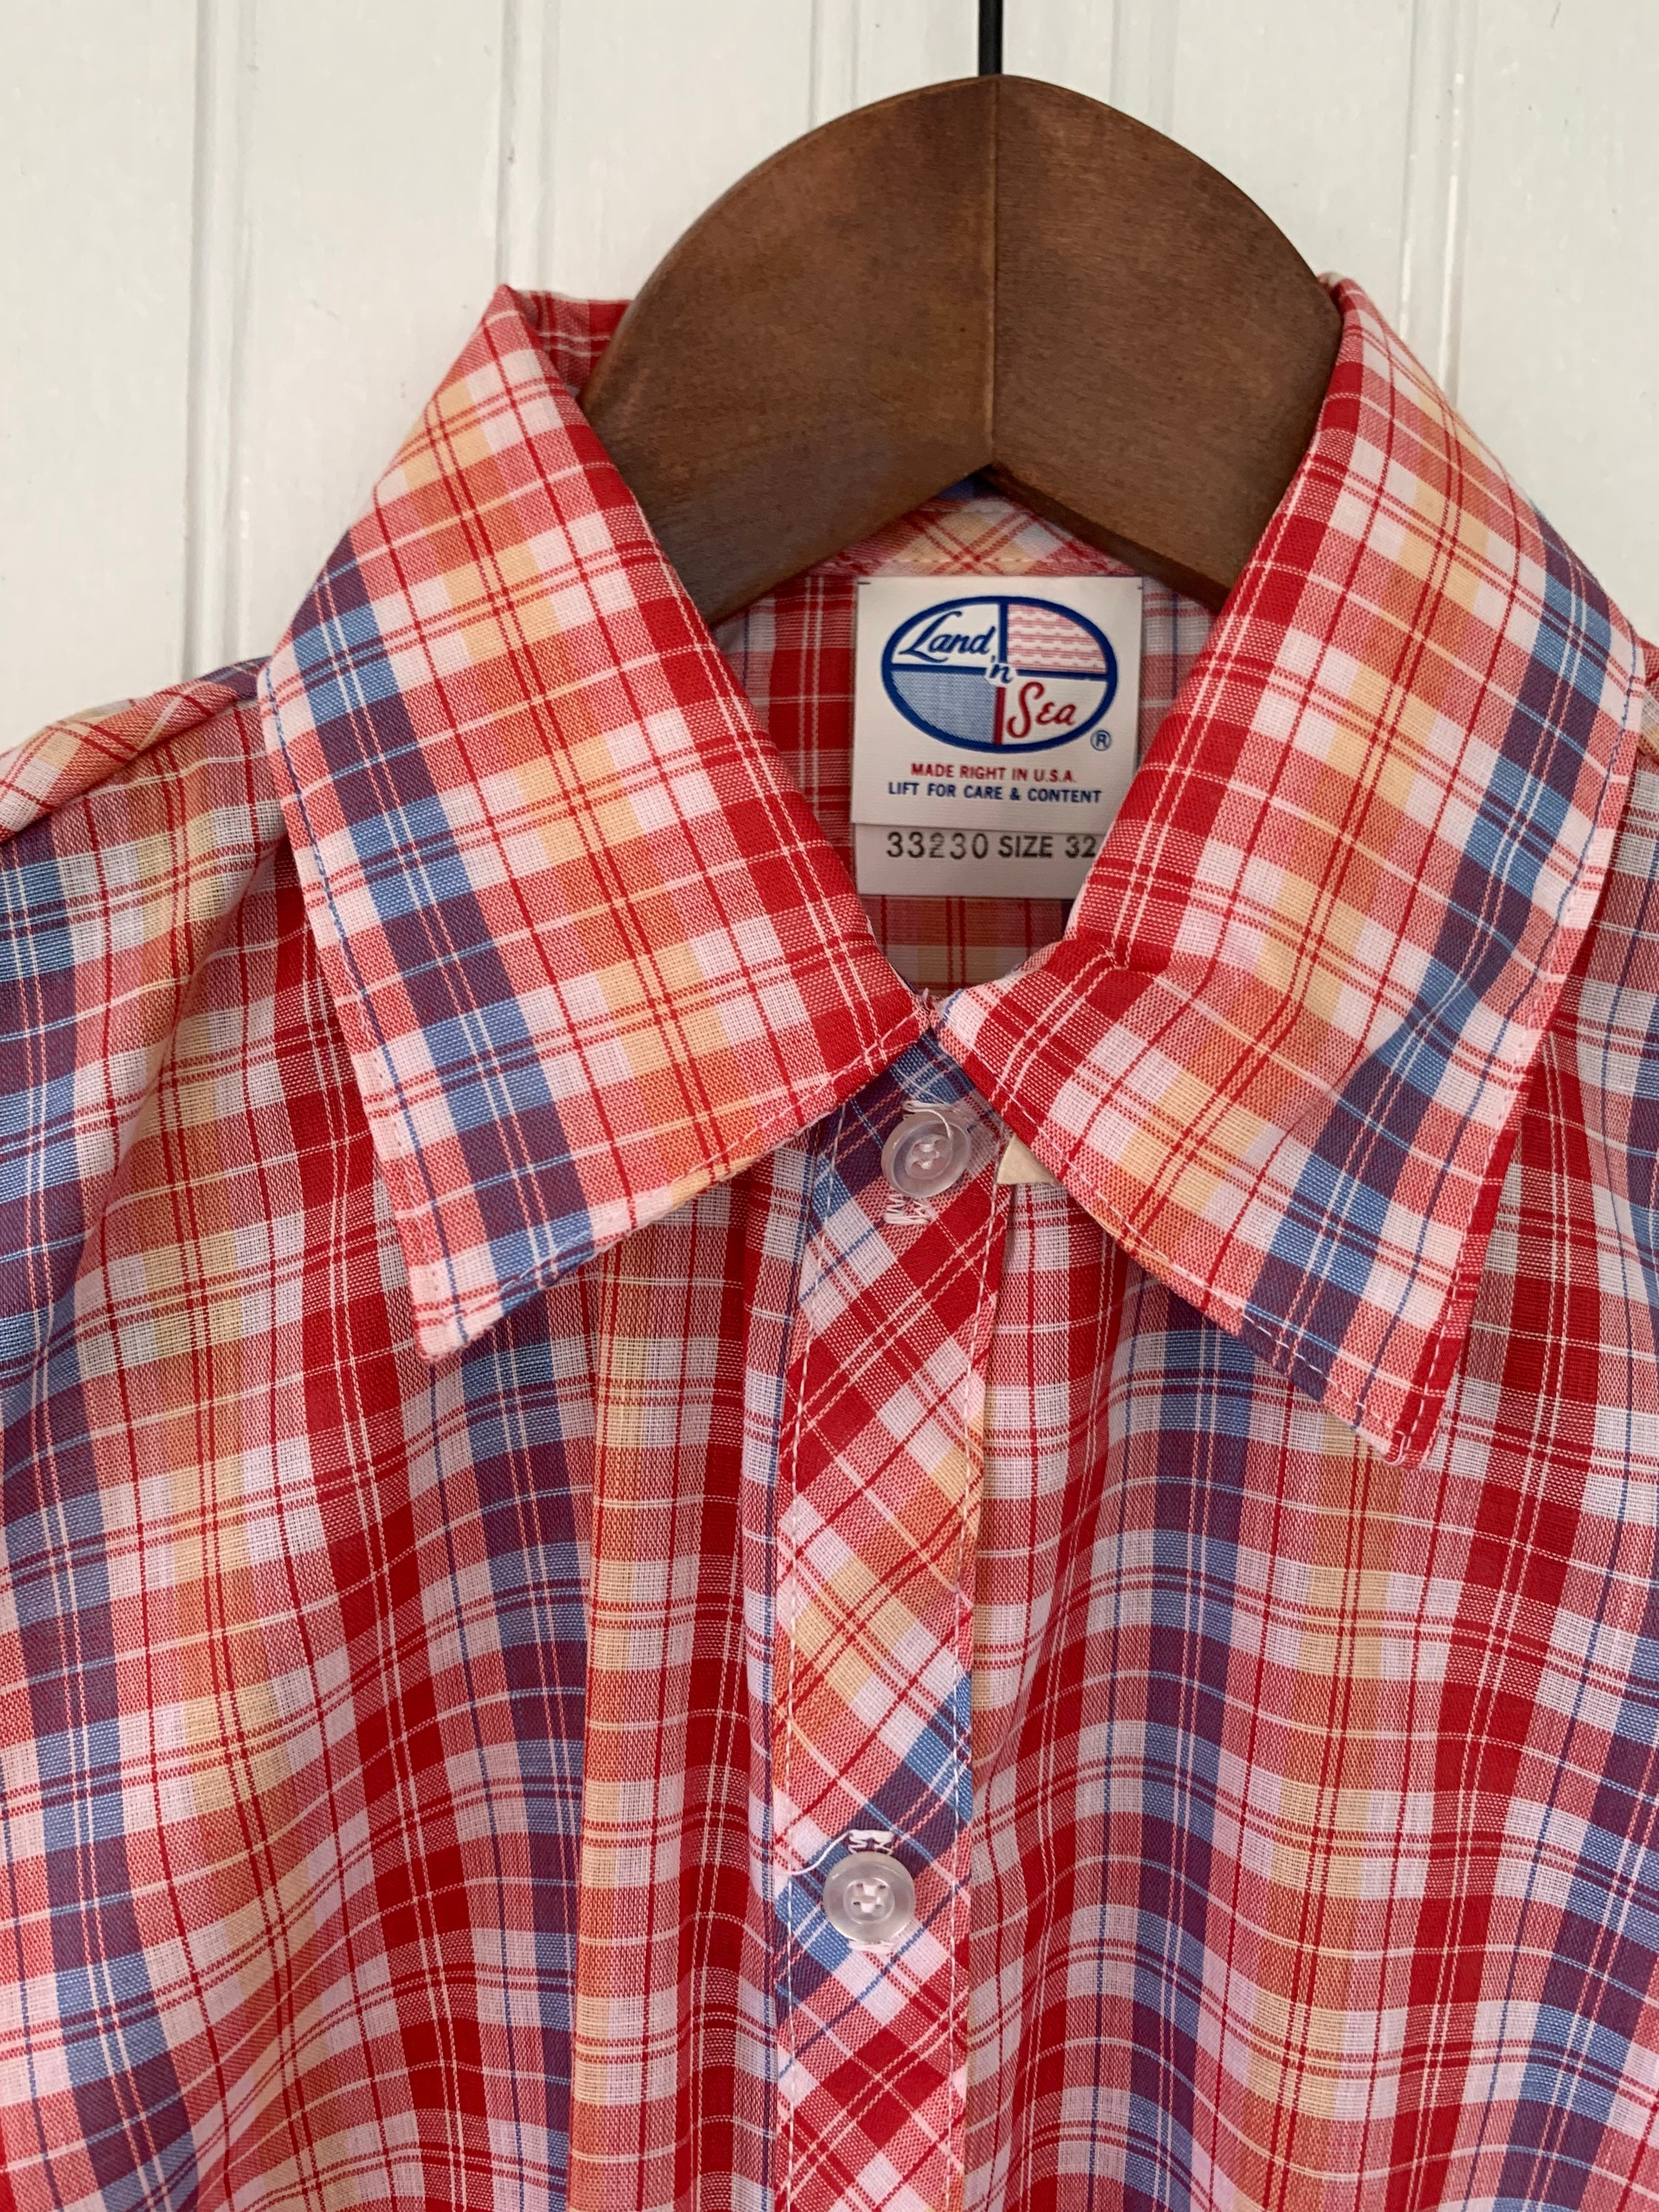 NWT 80s Vintage Plaid Sleeveless Top Size XS Small Red White Blue ...